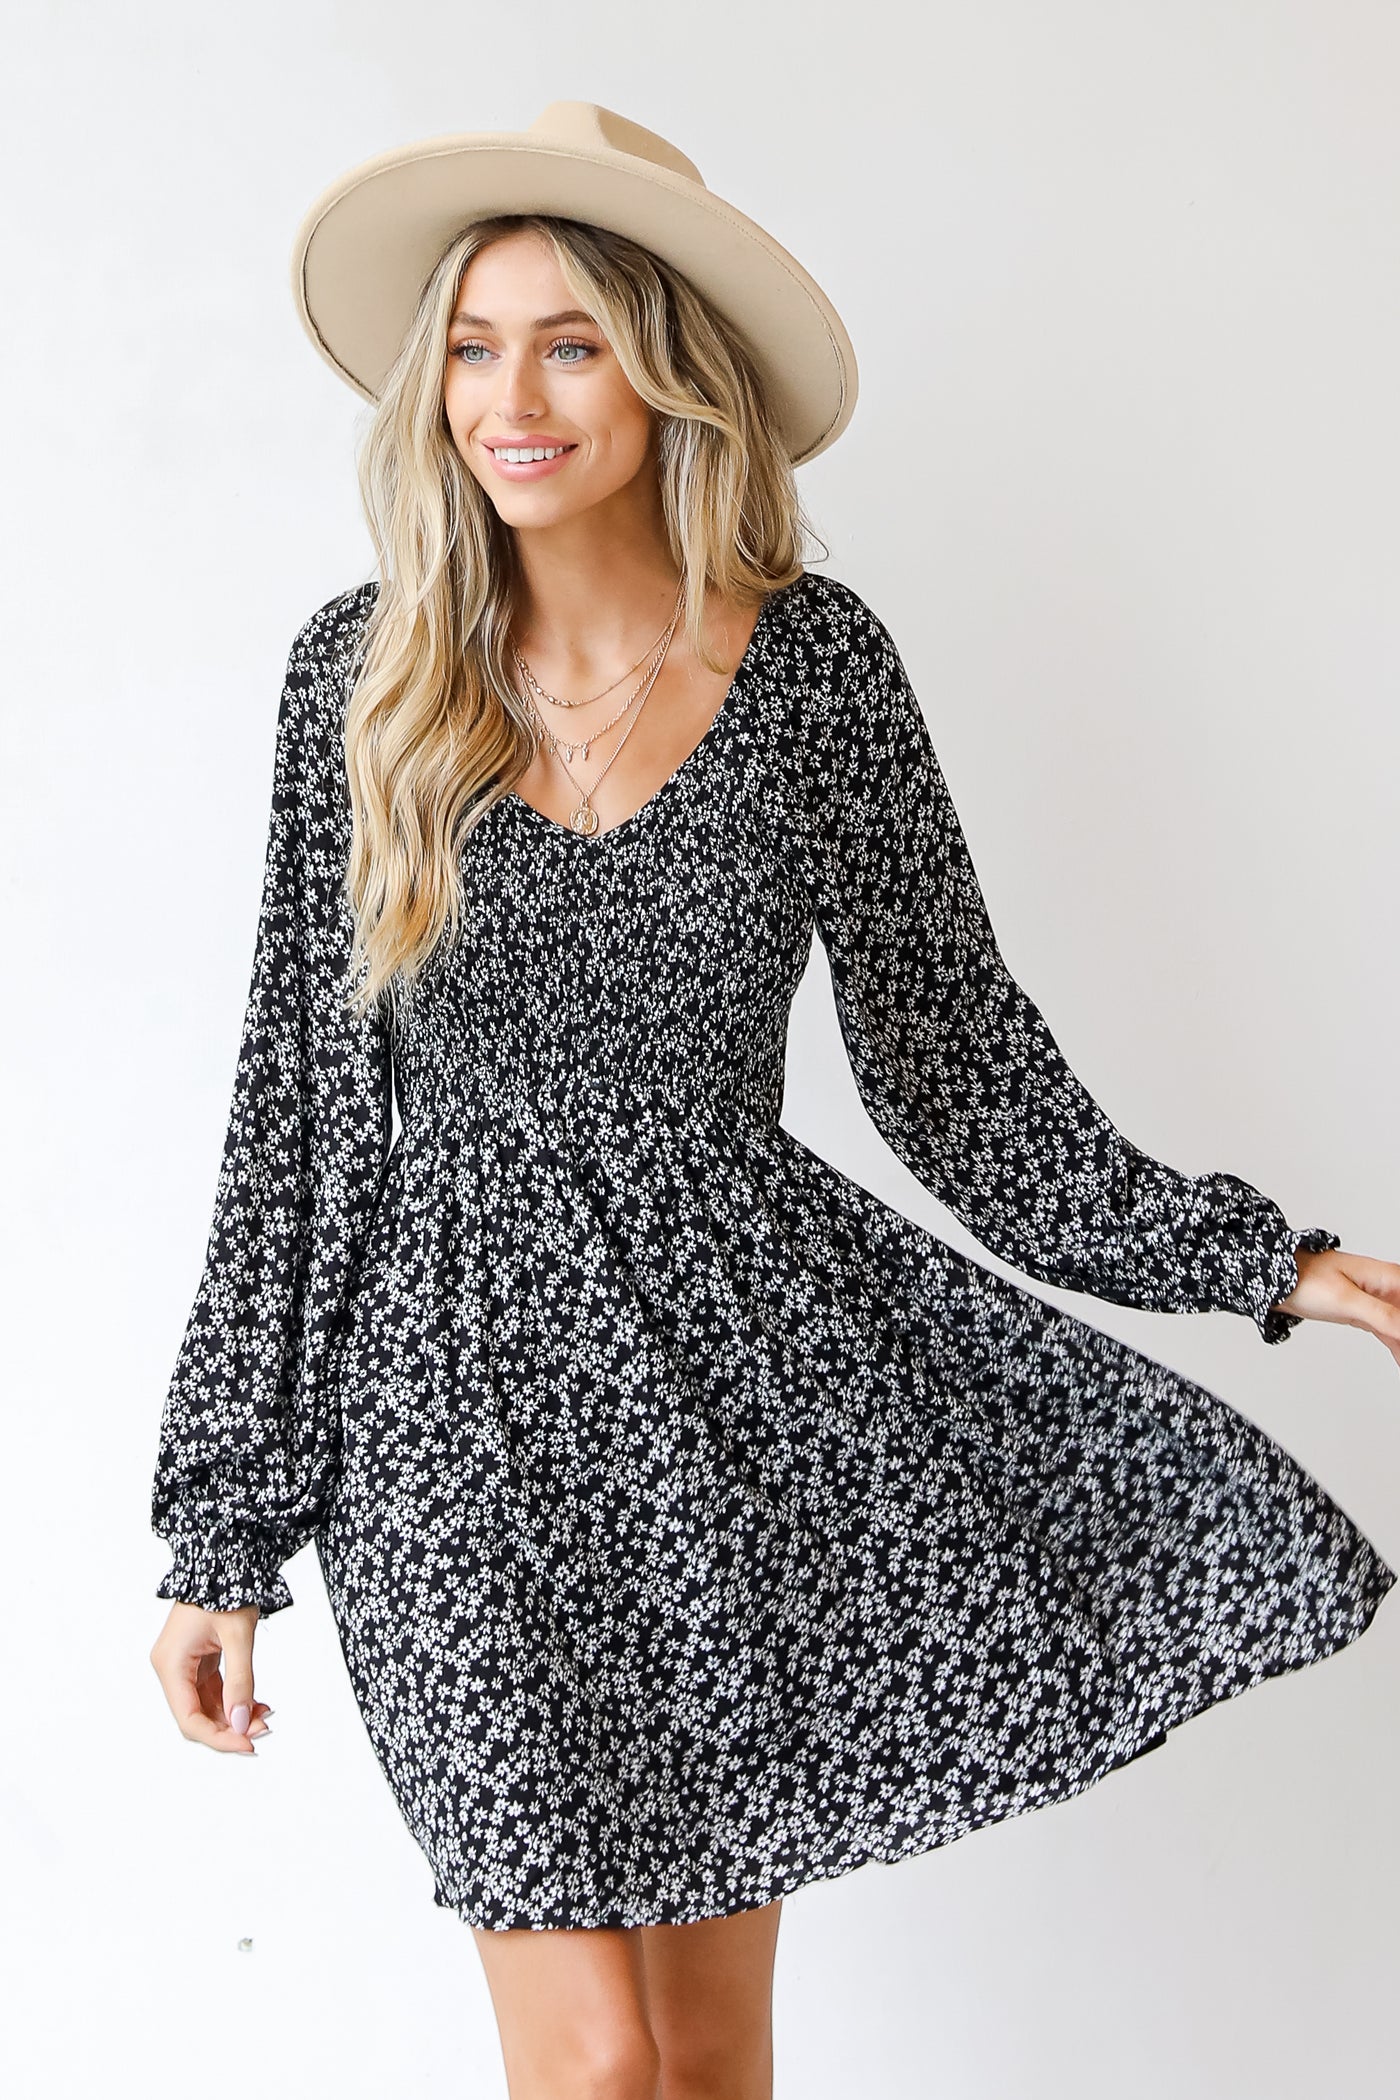 Model Wearing Floral Dress And Hat 